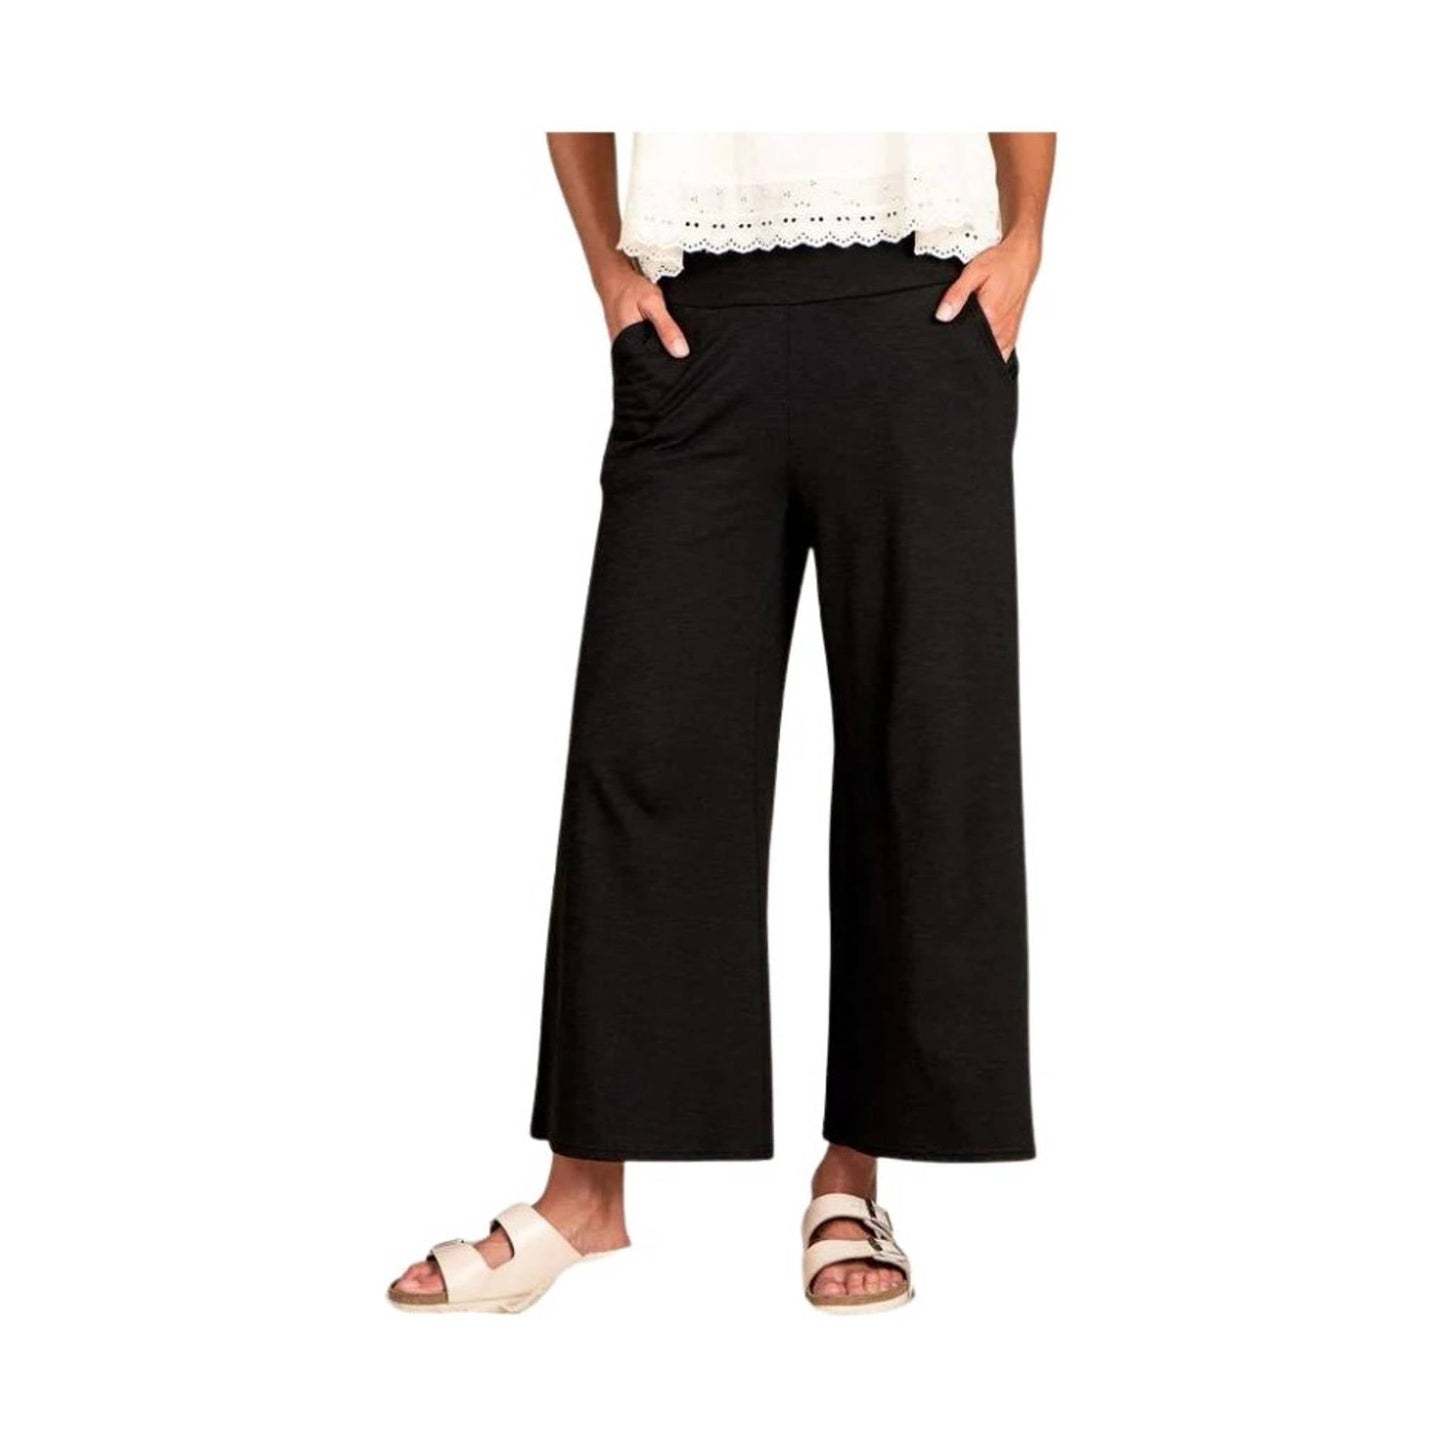 Toad & Co Women's Chaka Pull On Pant - Black